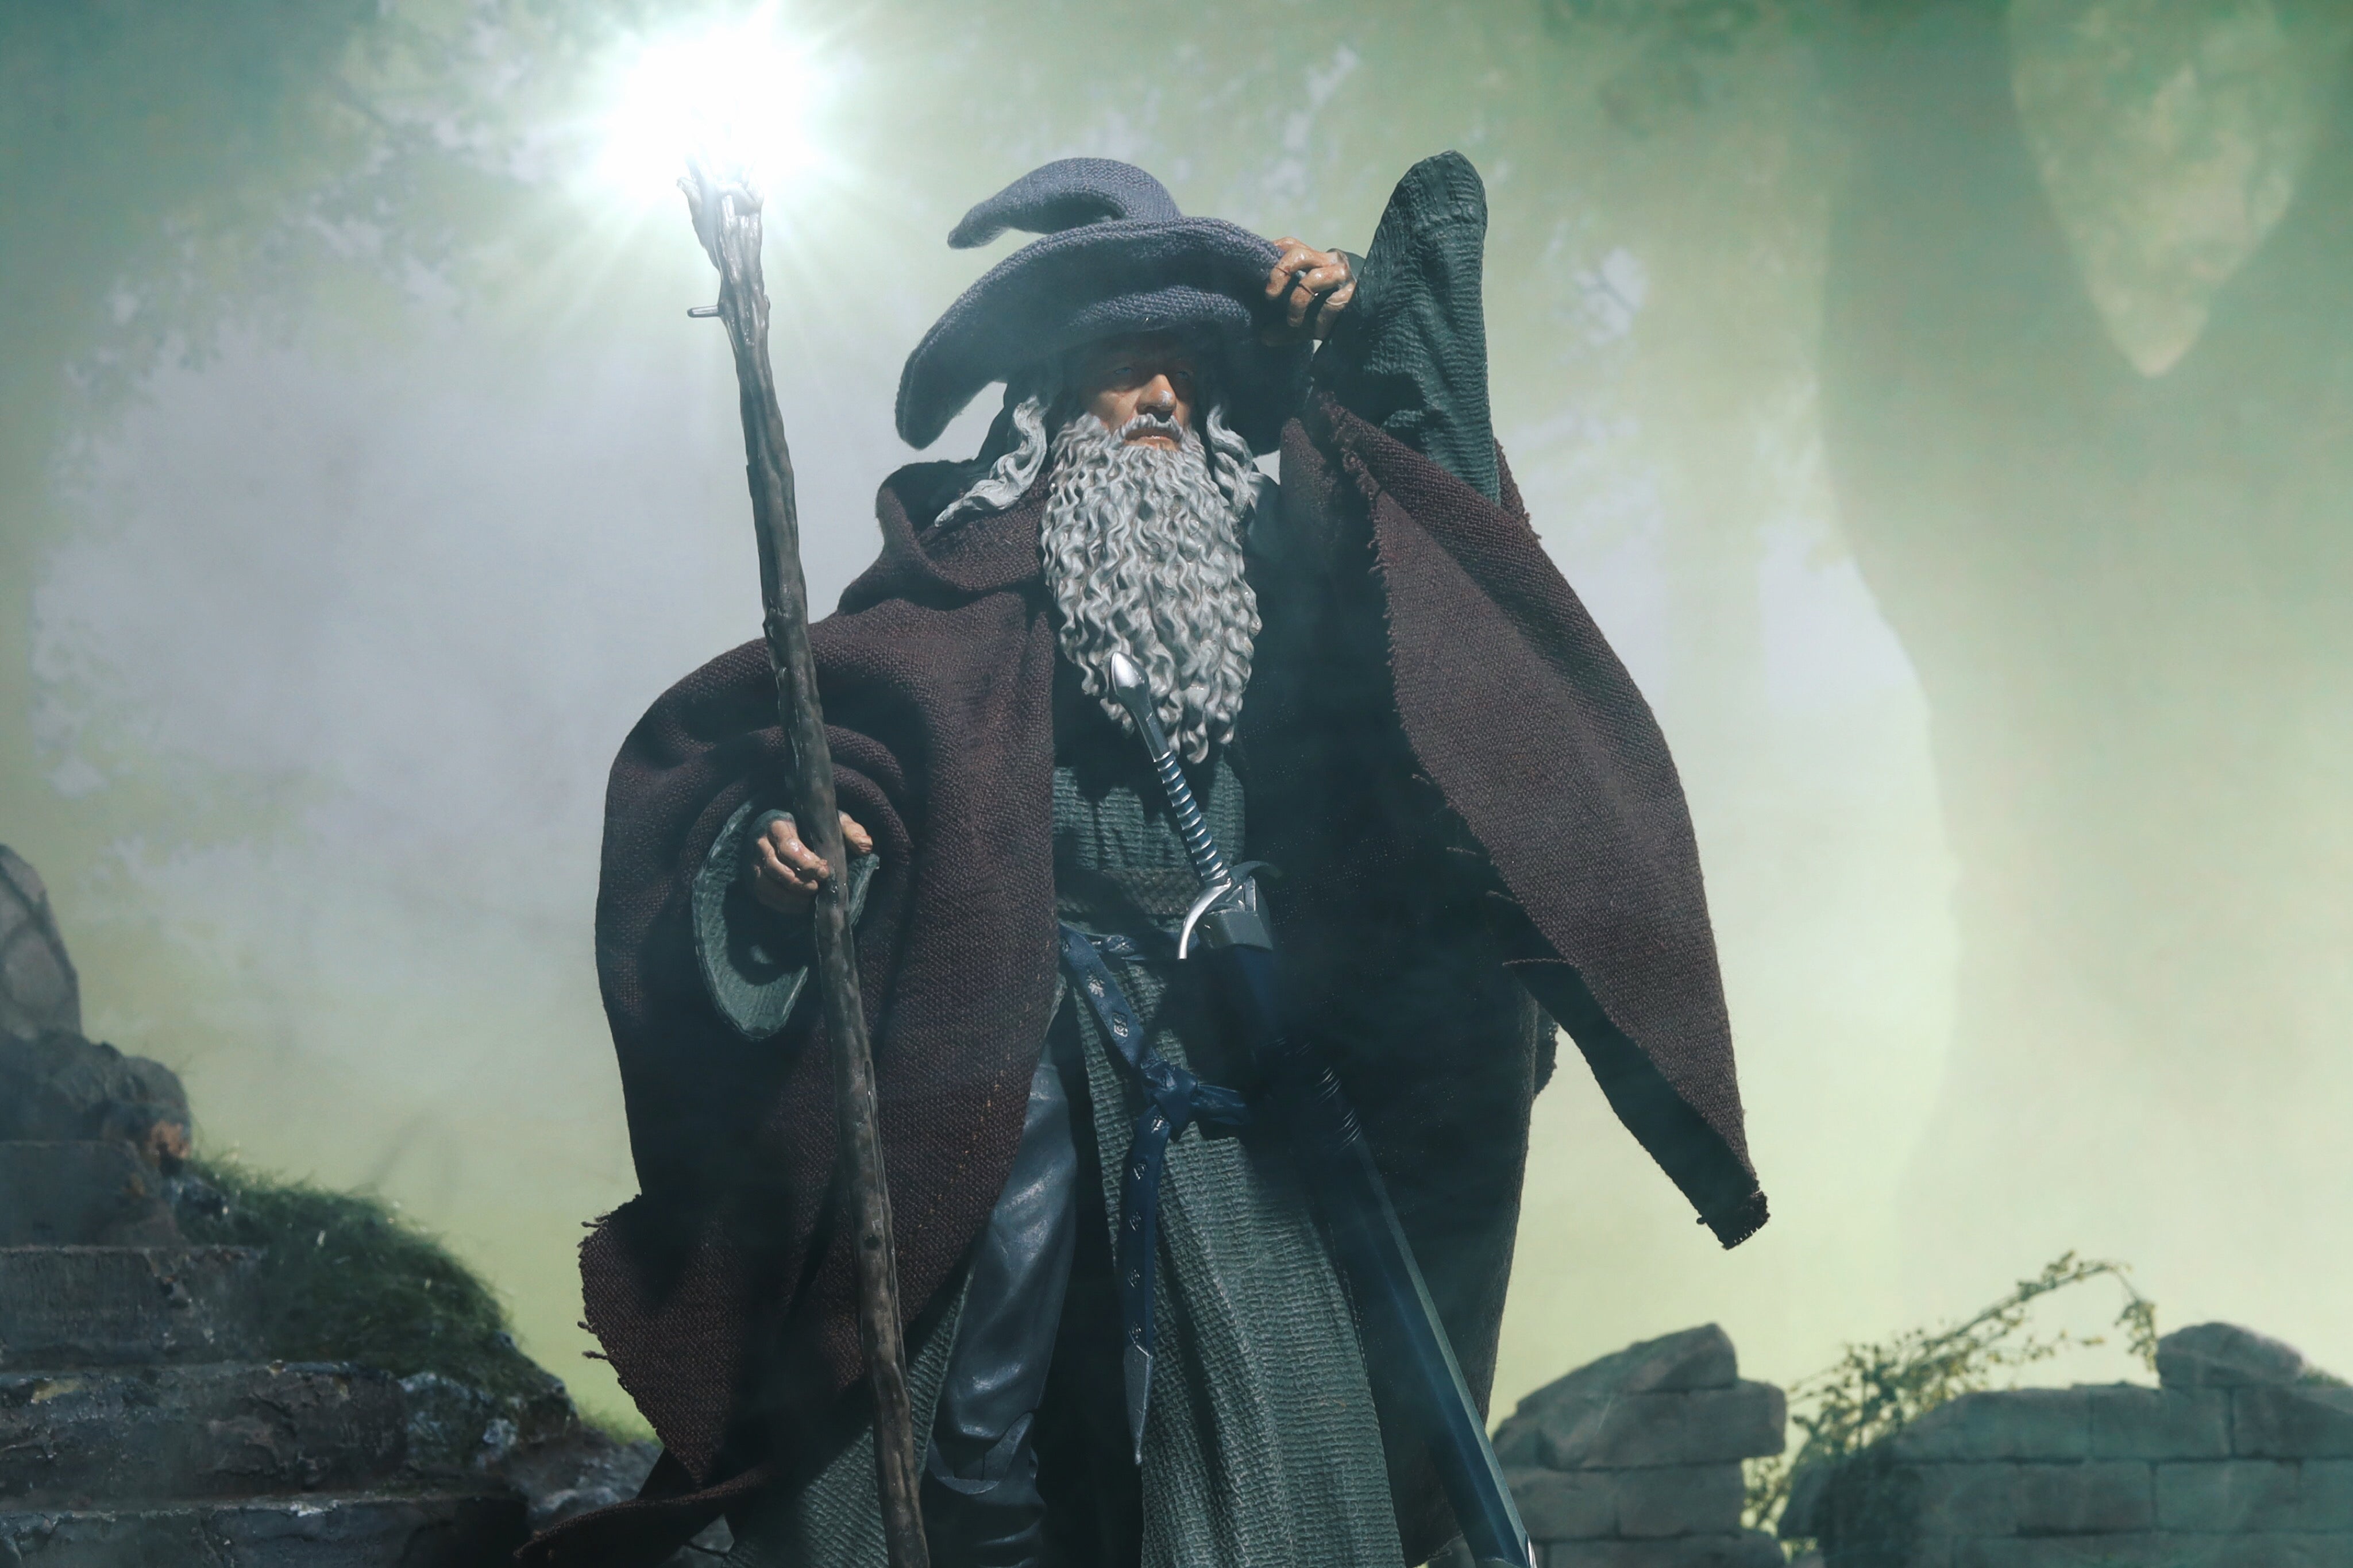 【IN STOCK】Custom cloak for DST The Lord of the Rings Gandalf the grey